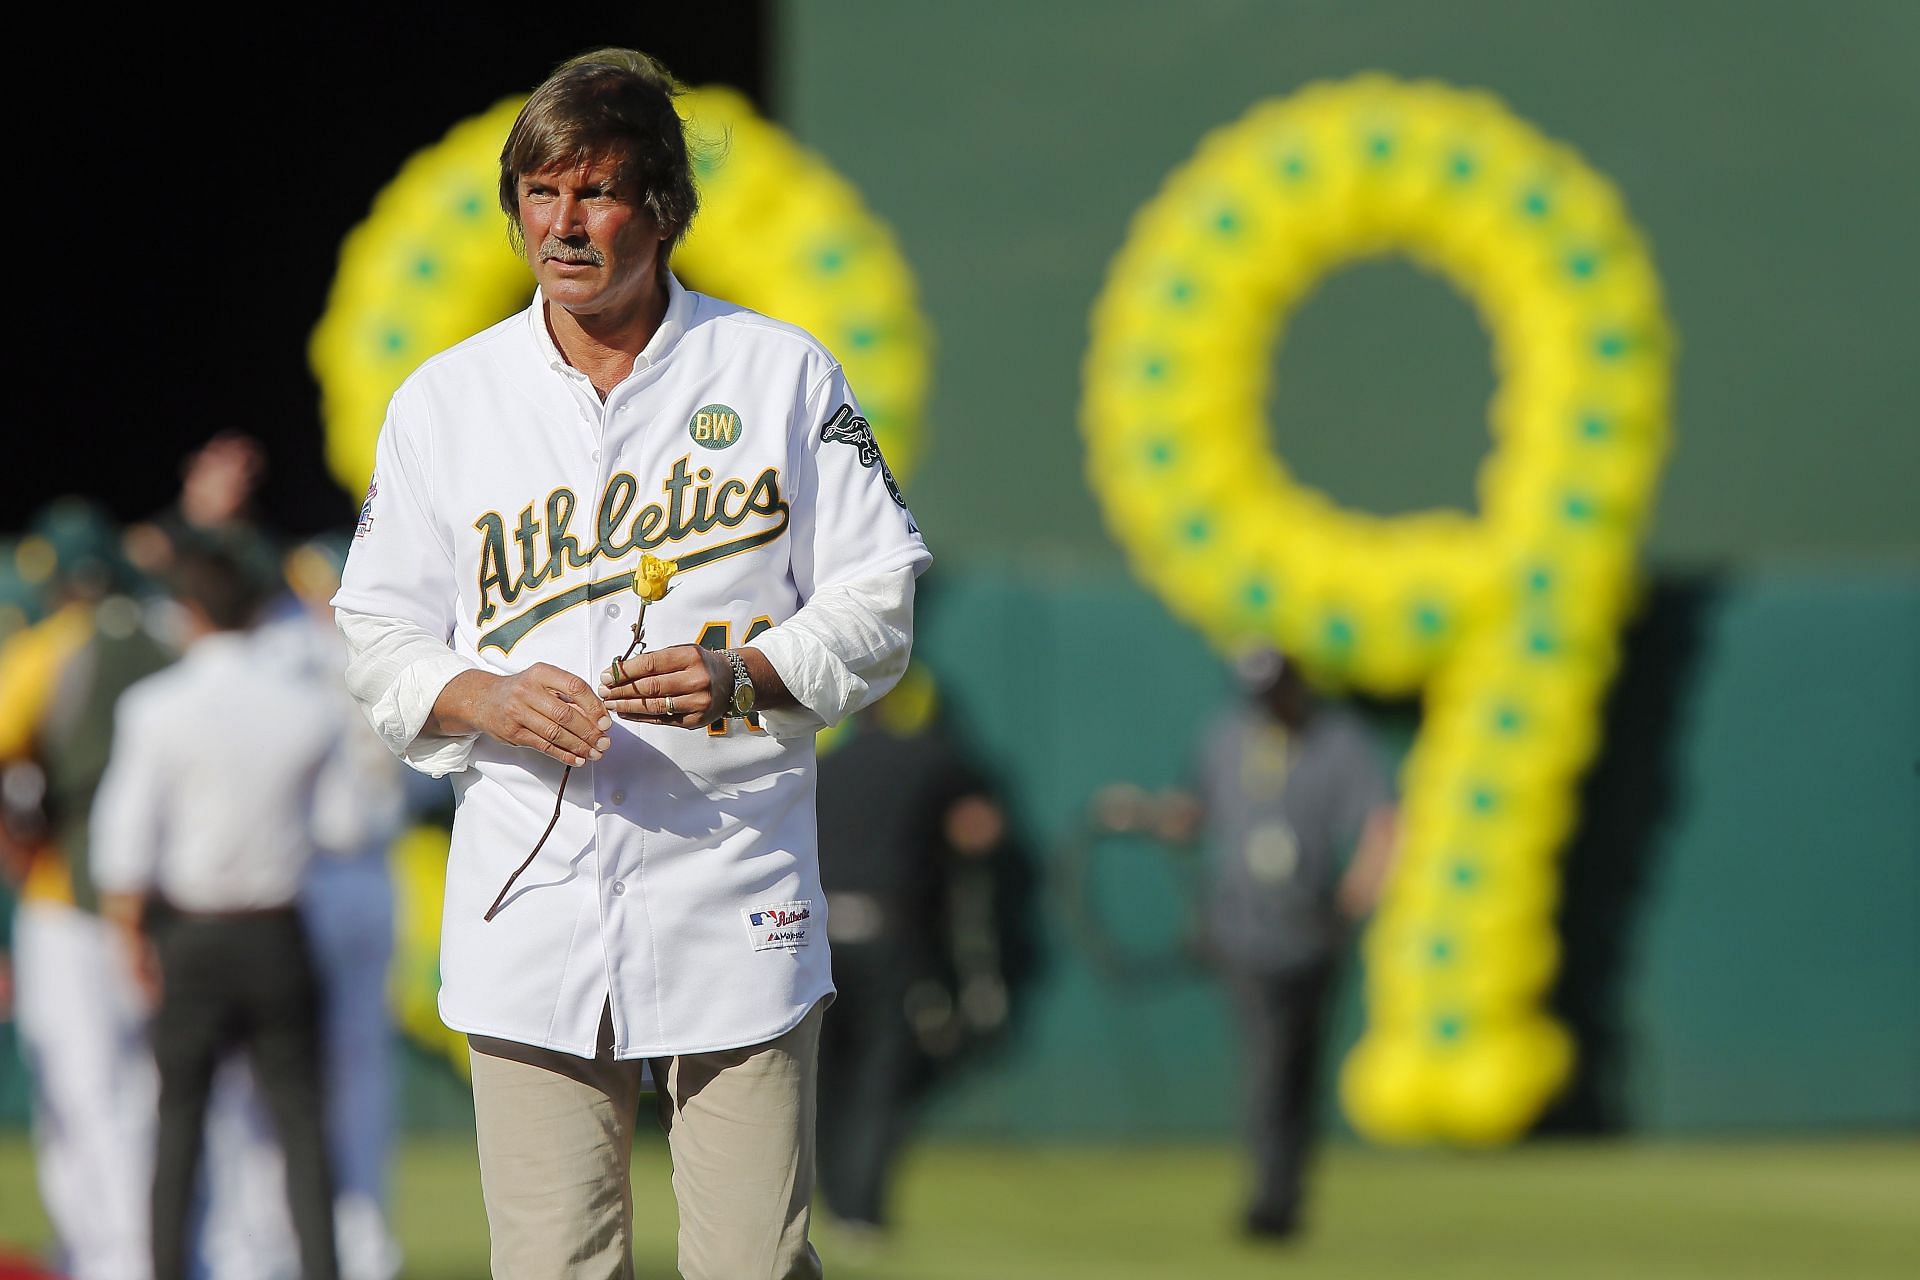 When Dennis Eckersley's daughter expressed grief for being shunned